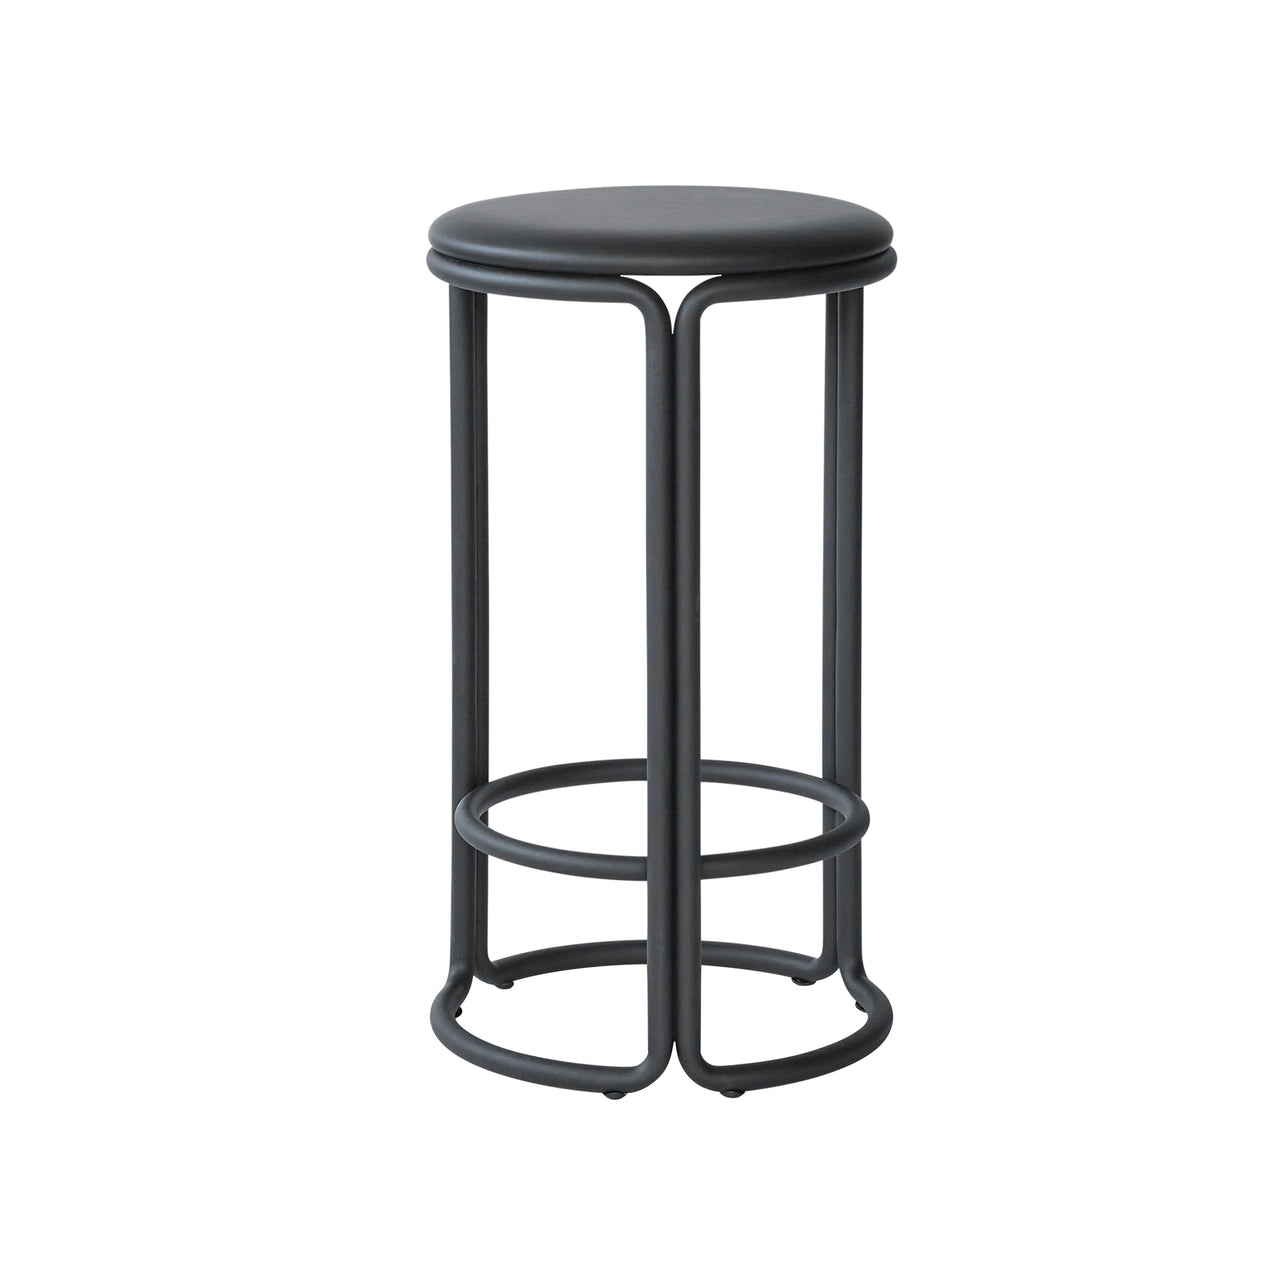 Hardie Bar + Counter Stool: Upholstered + Counter + Black